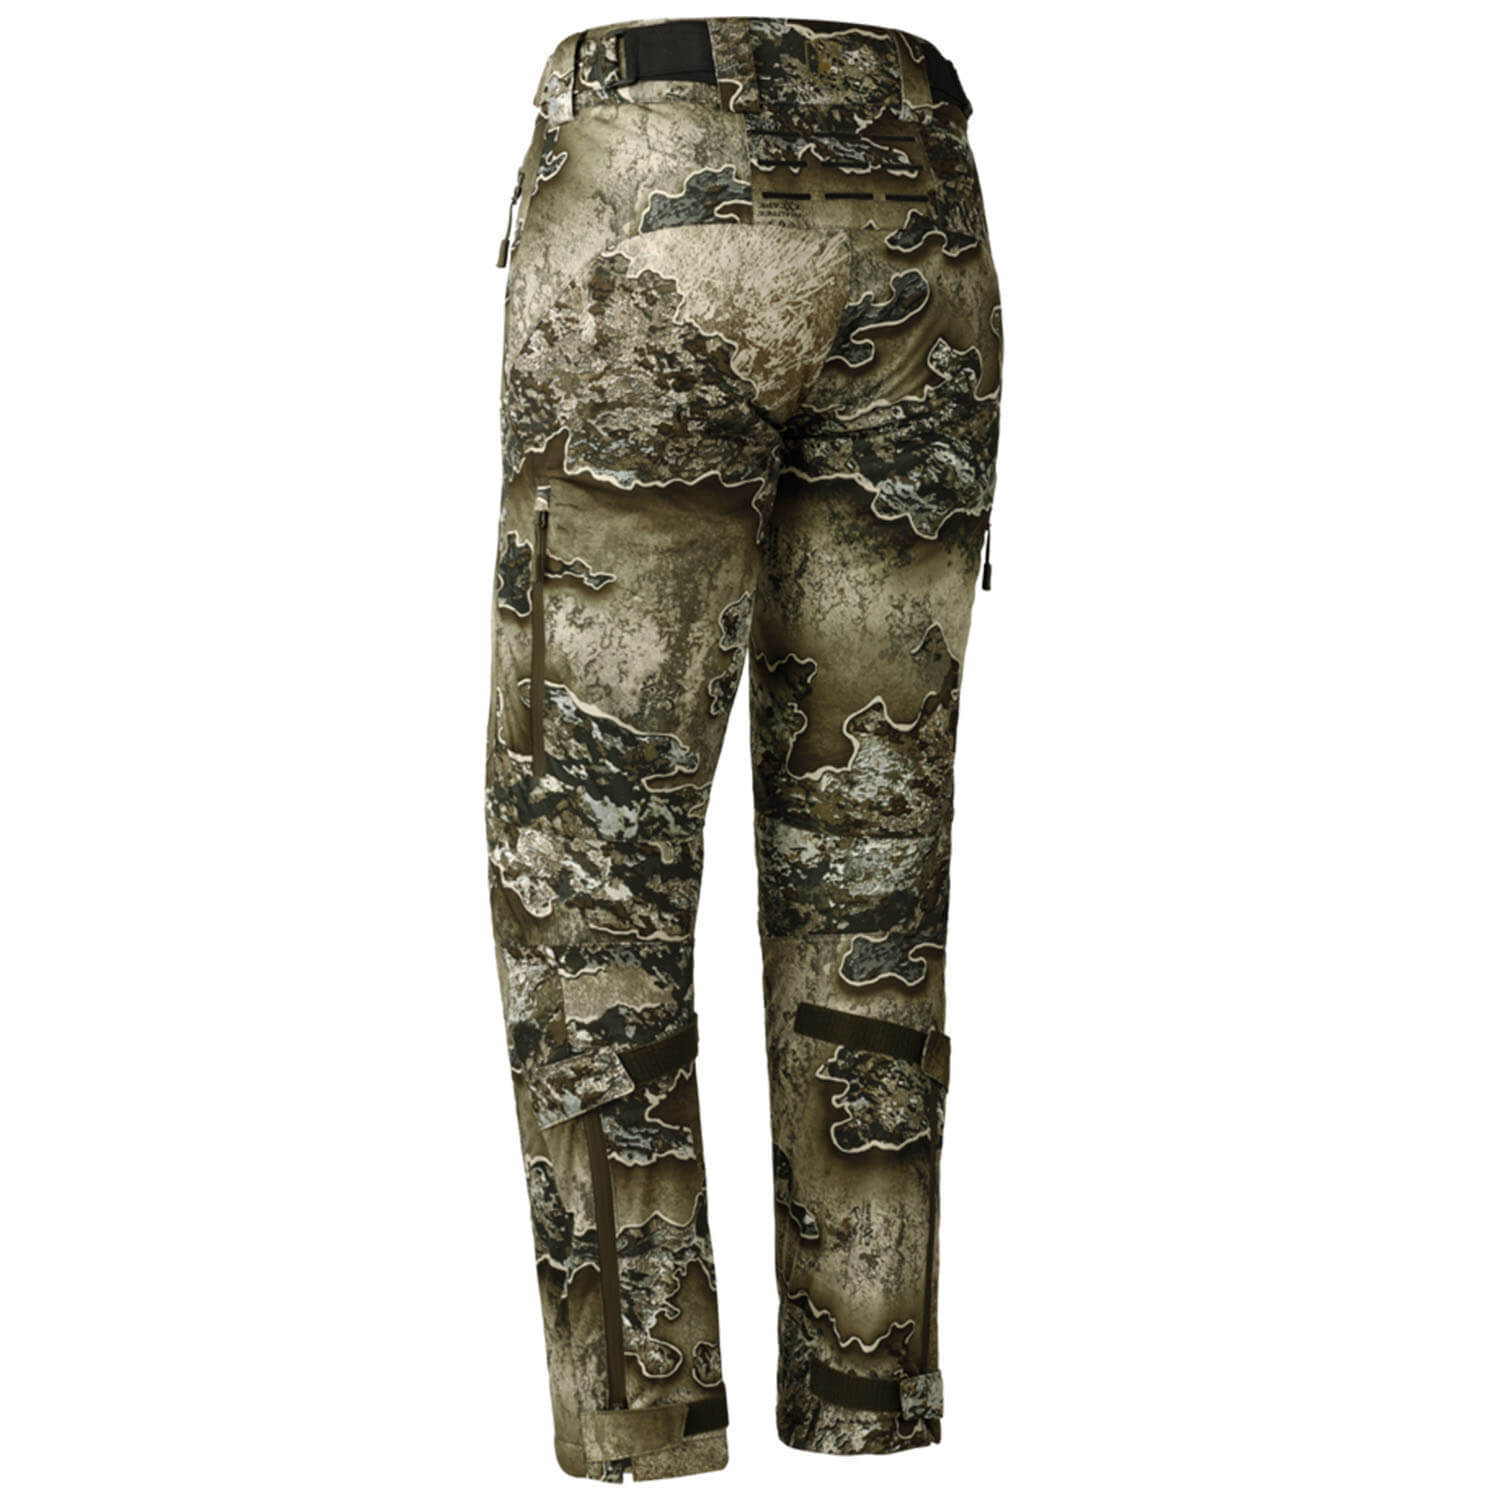 Deerhunter winter Trousers Lady Excape (realtree excape)